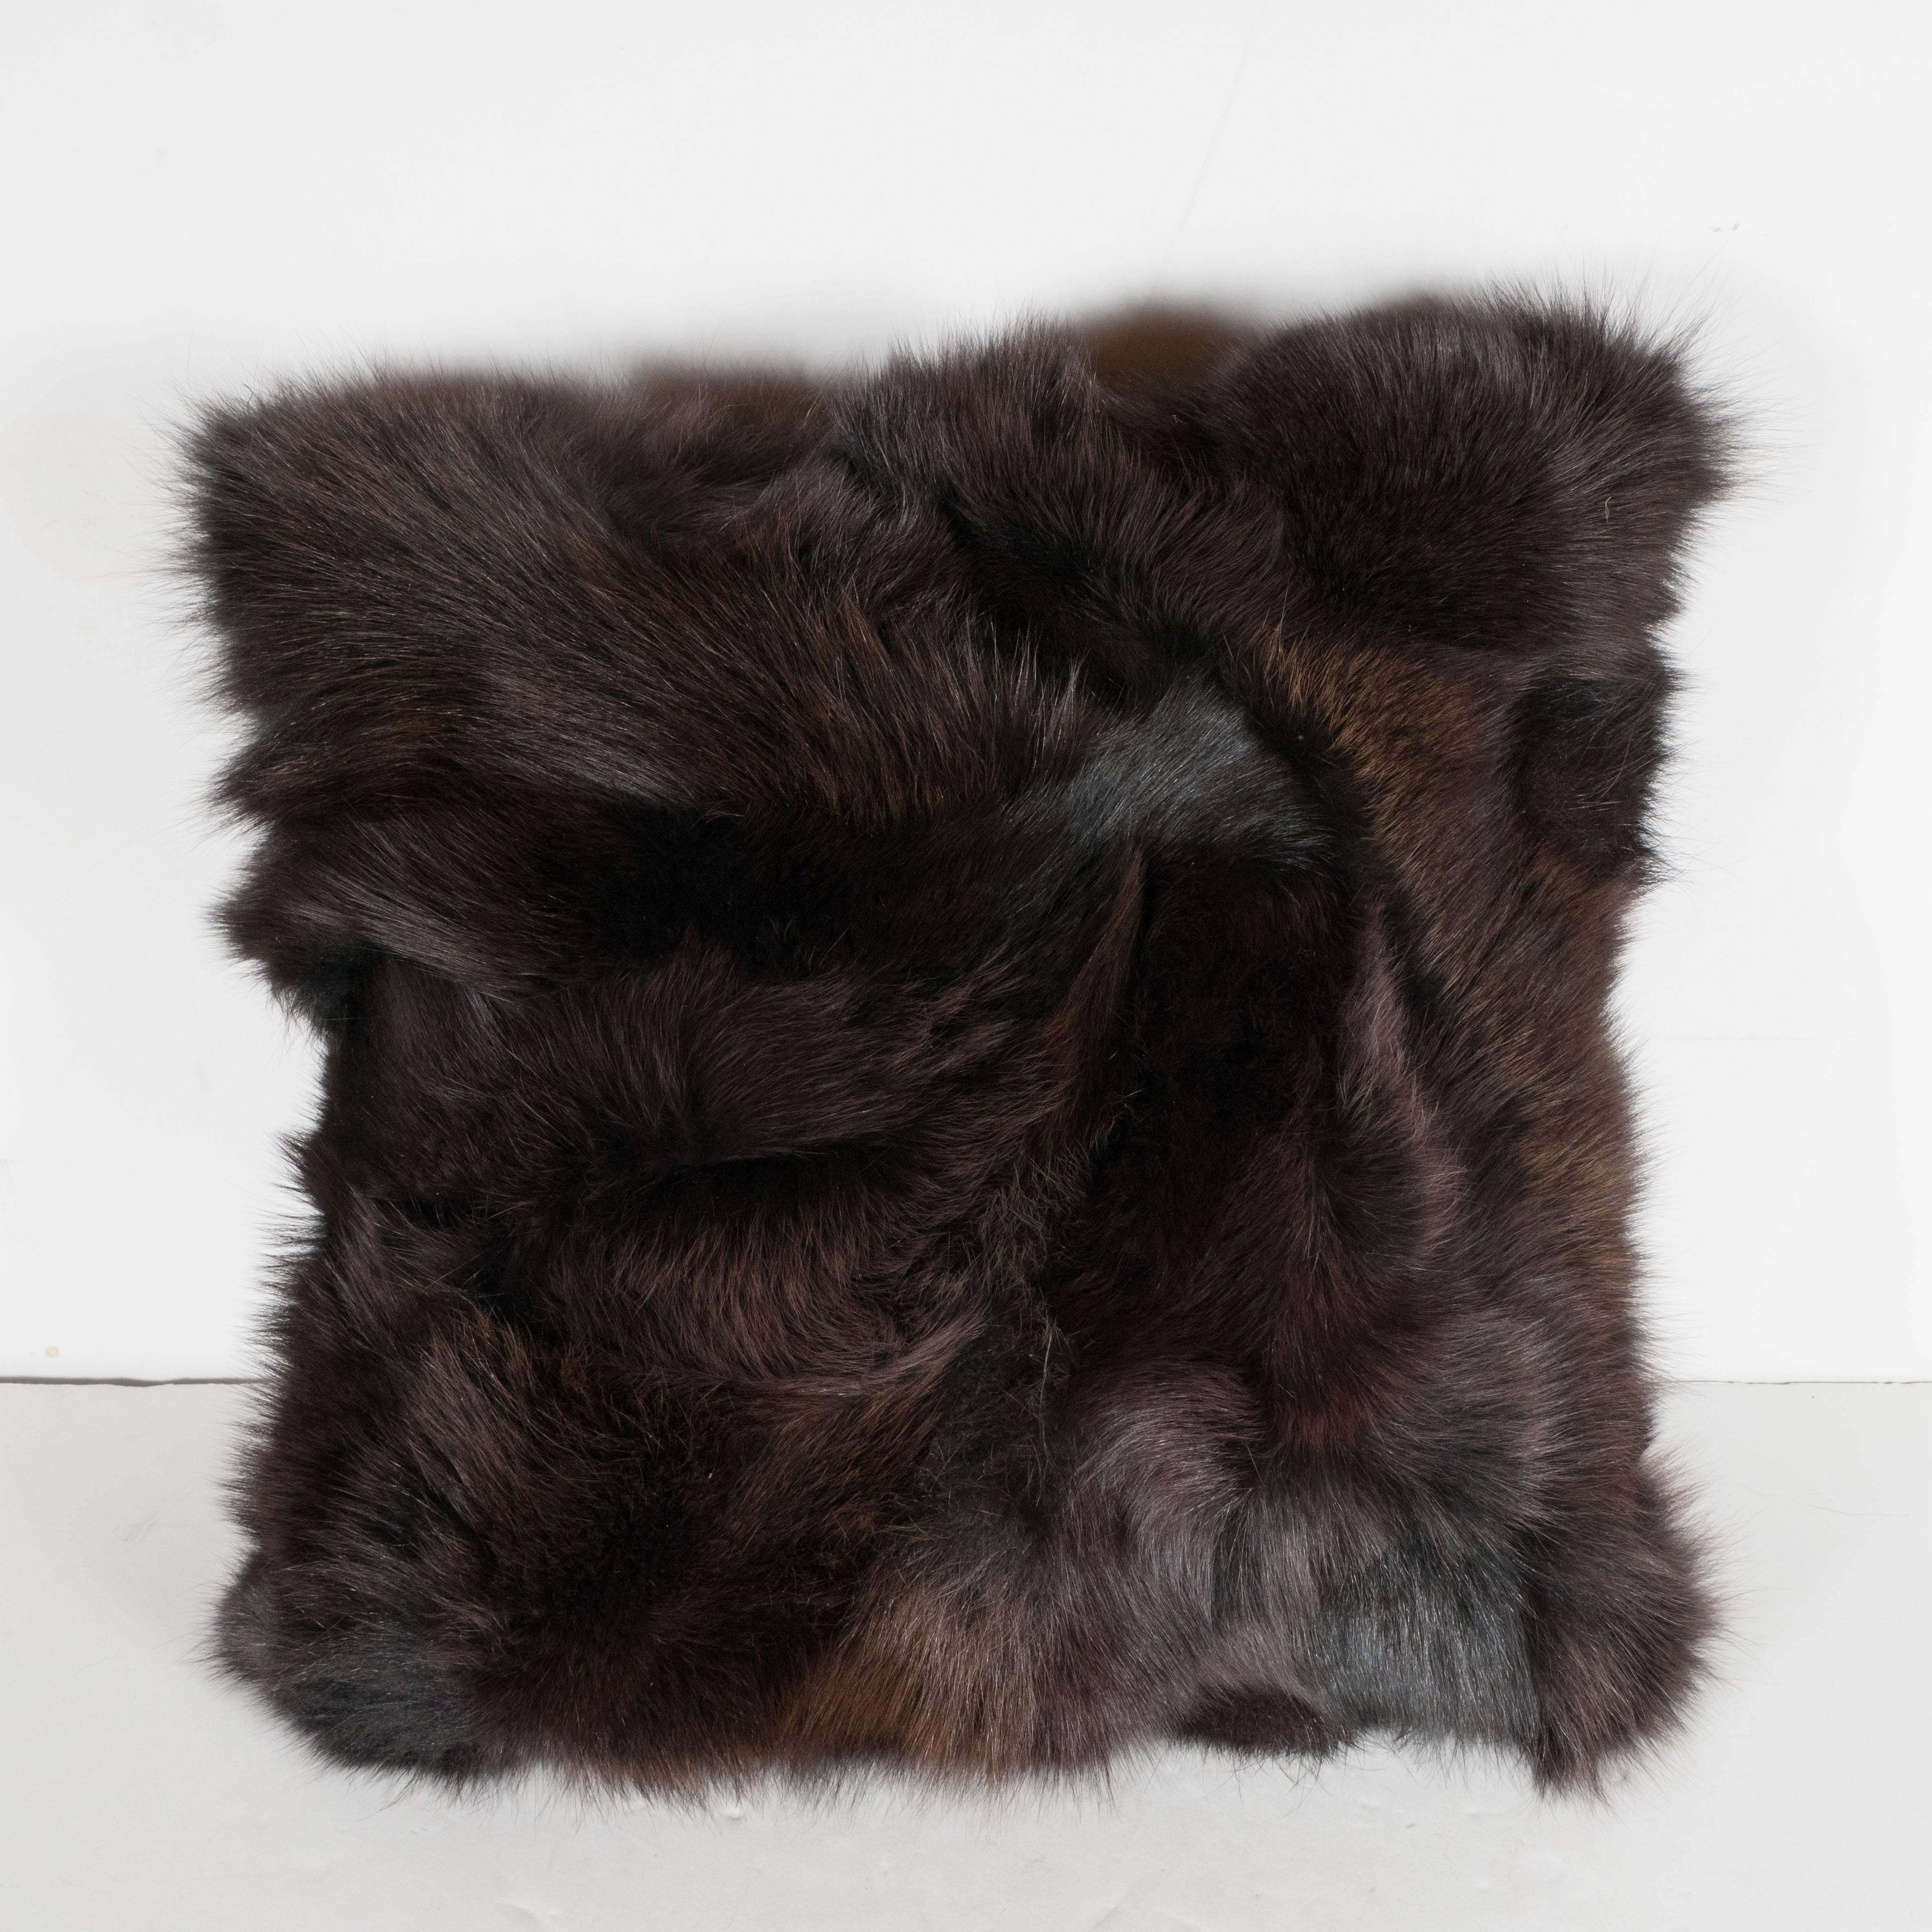 Luxurious Custom New Handmade Fox Fur Pillows in a Stunning Onyx Shade In Excellent Condition For Sale In New York, NY